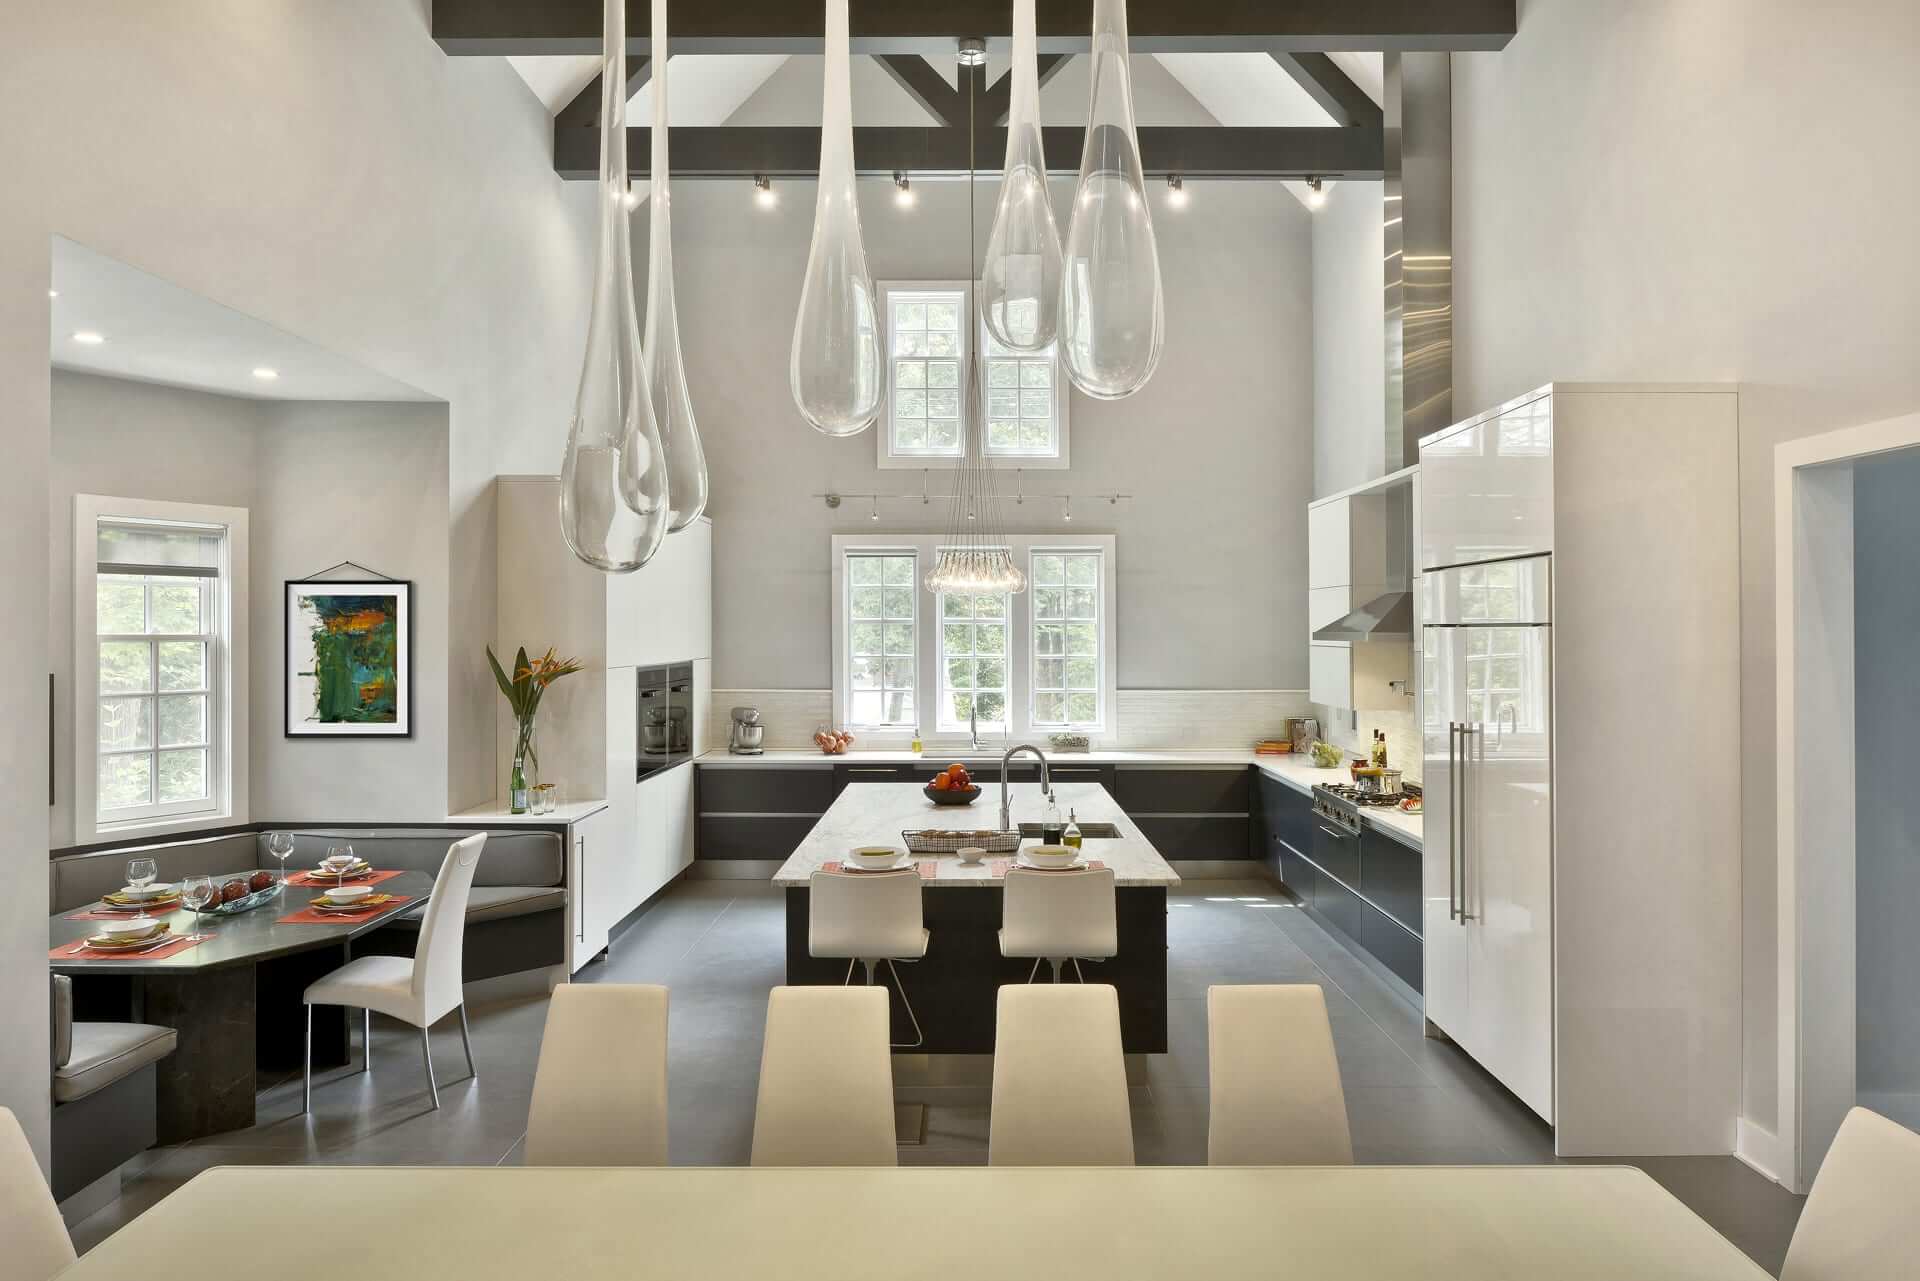 Contemporary kitchen with soaring ceiling features frameless Artcraft Cabinetry in both high-gloss white finish and dark grey-stained oak.